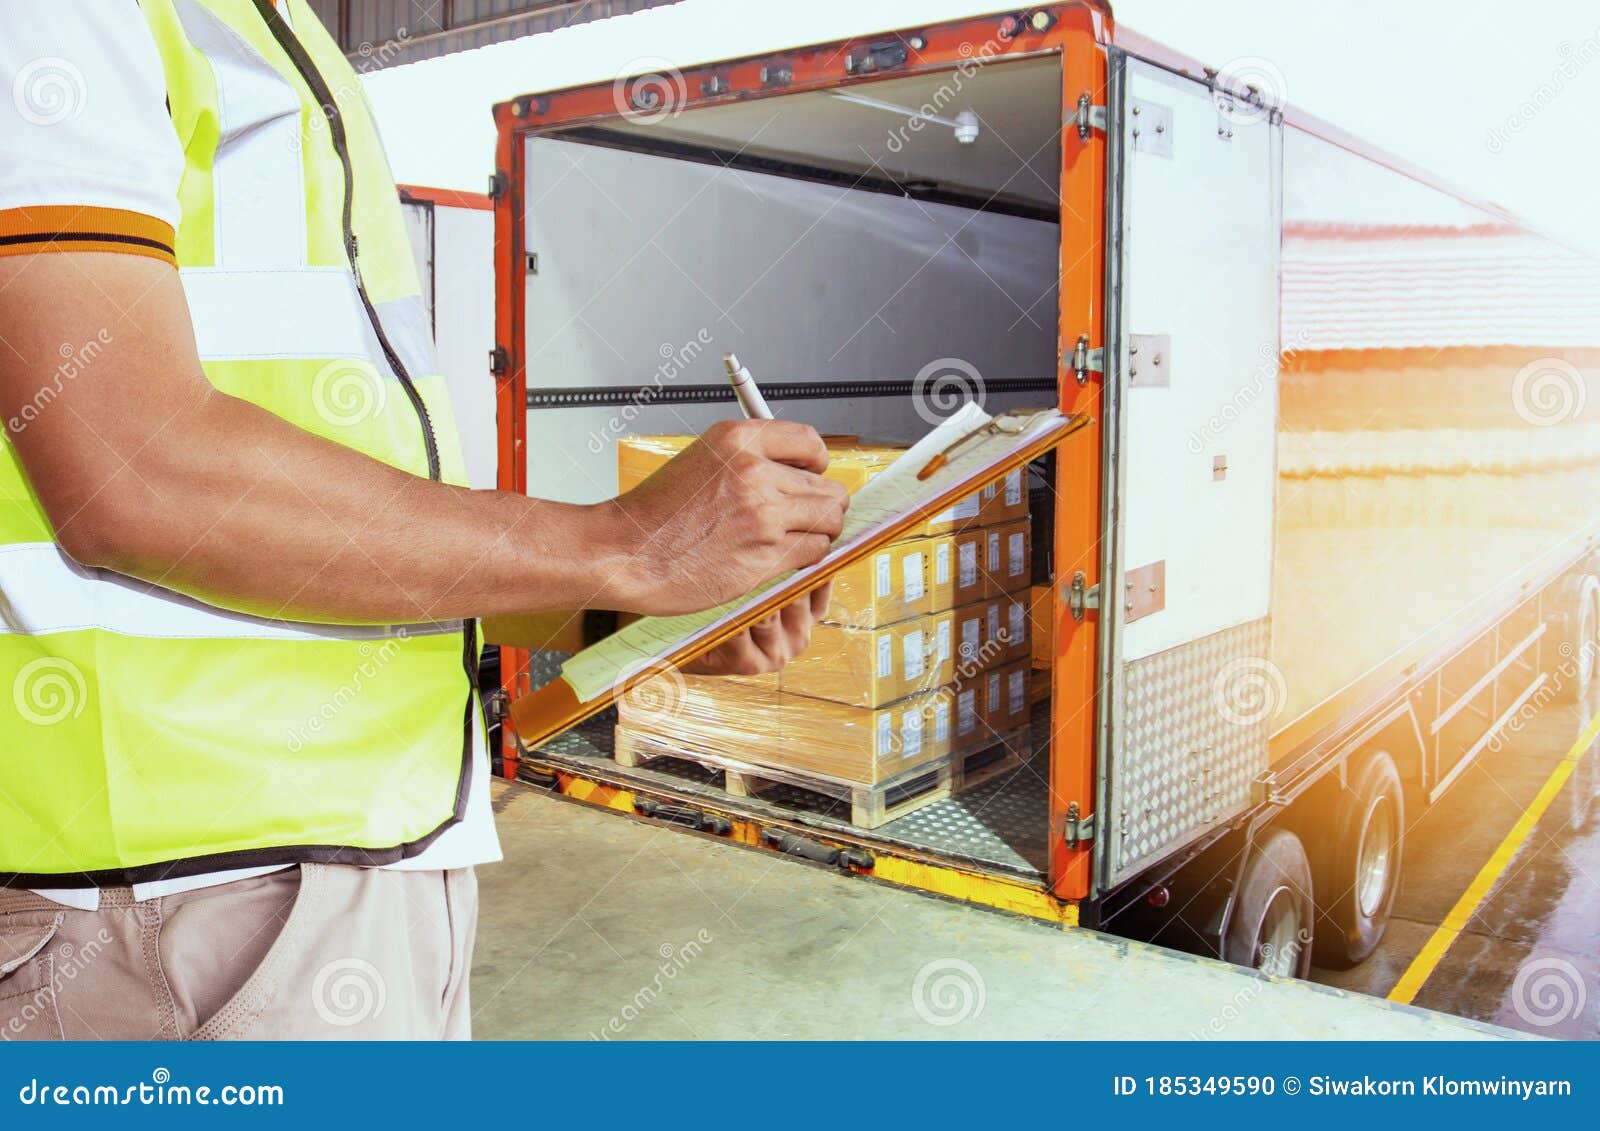 freight industry warehouse shipments transport. worker courier holding clipboard inspecting checklist load cargo into a truck.